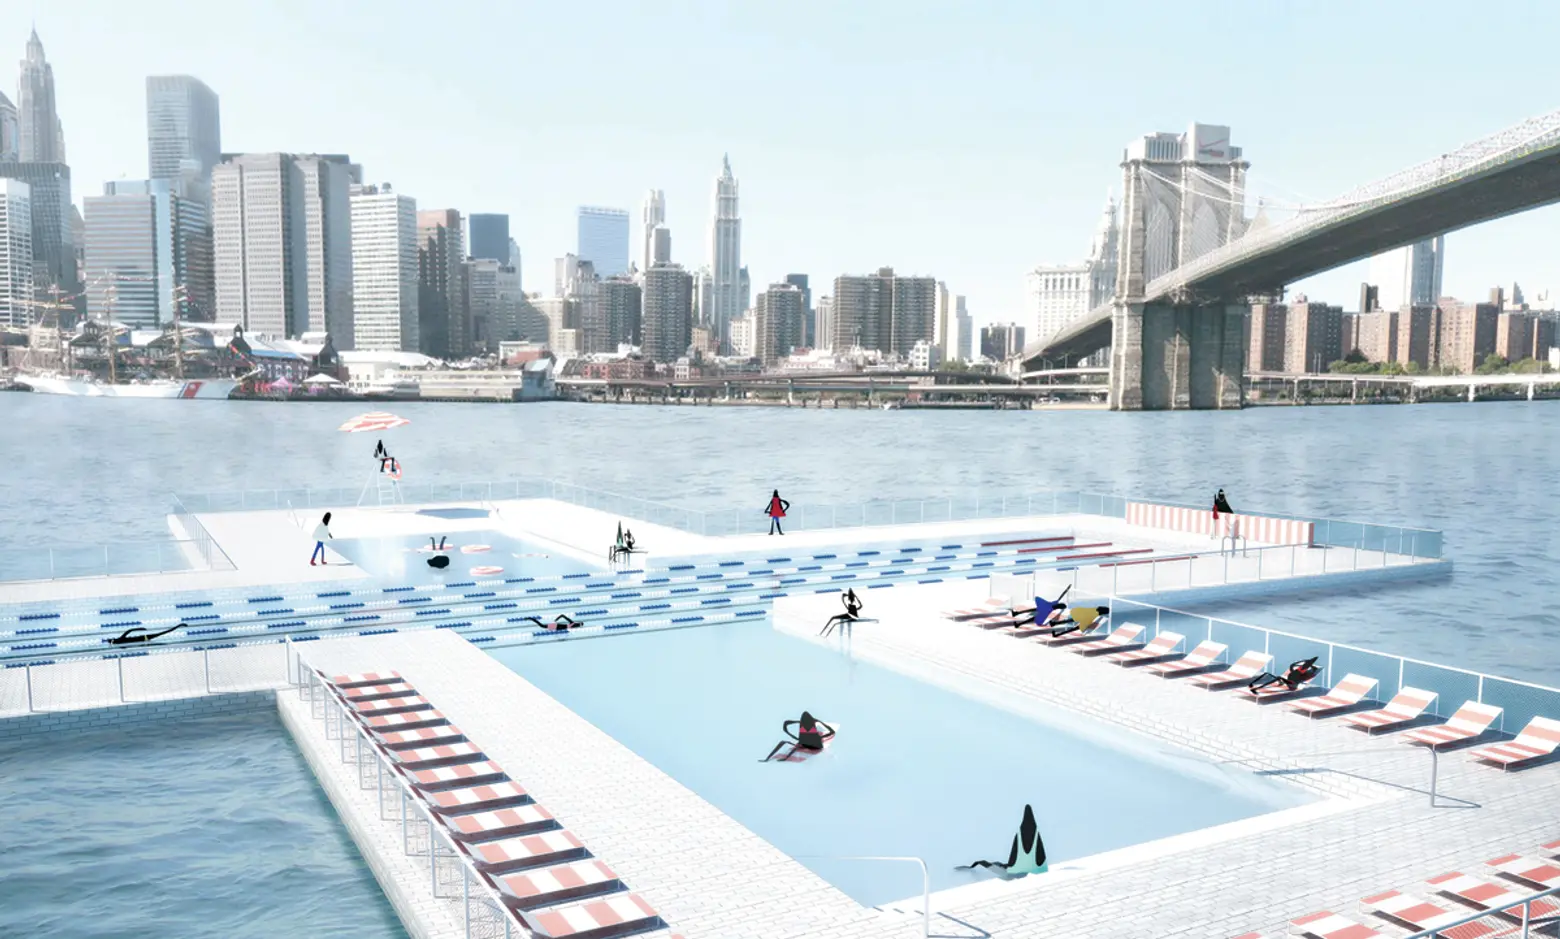 “Plus Pool” Will Let You Safely Swim in the East River